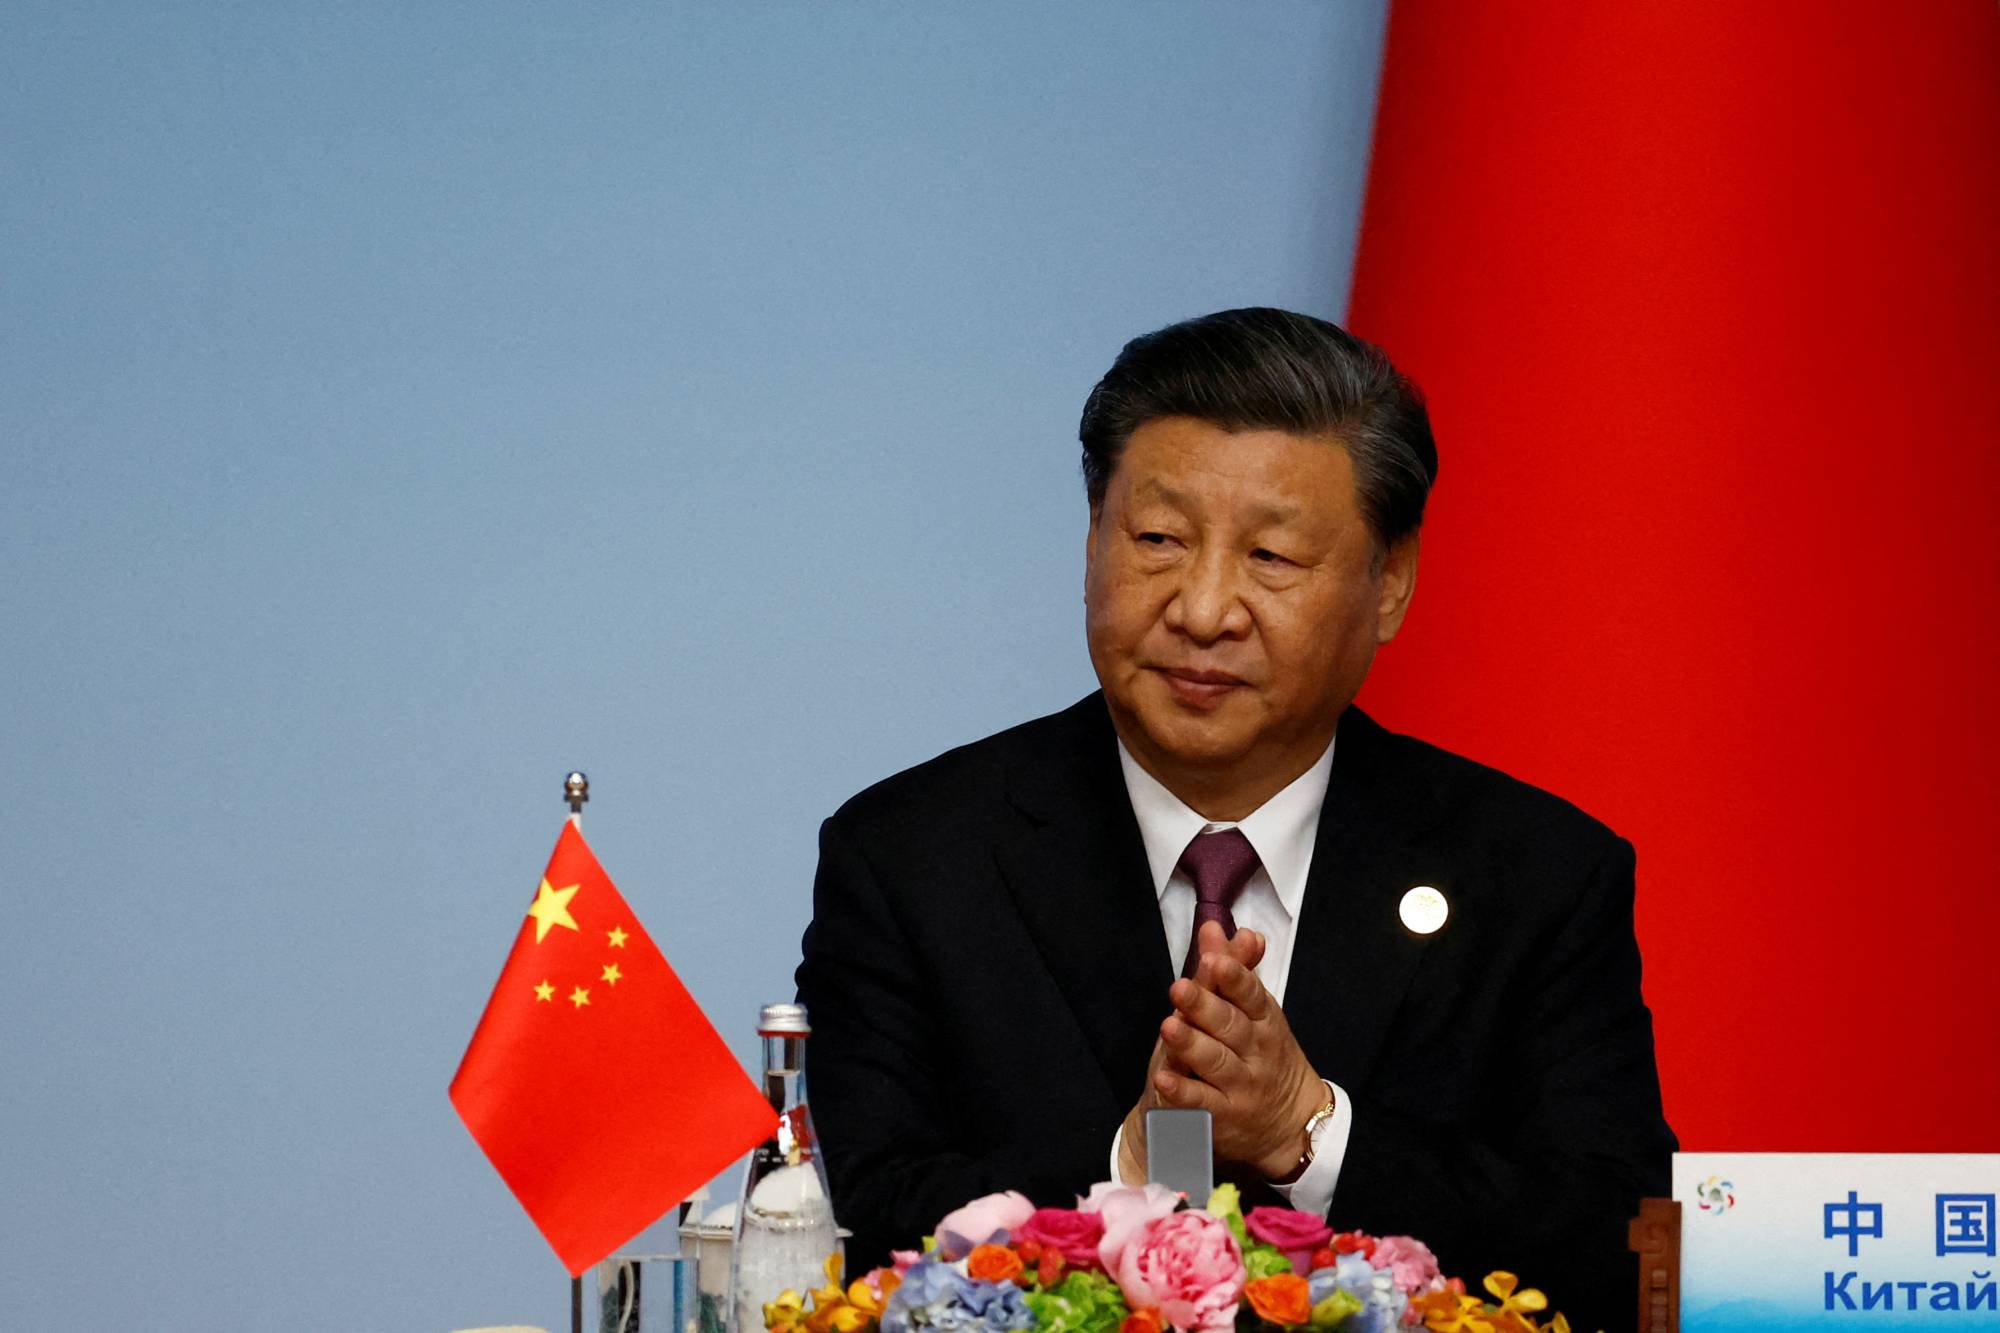 Chinese President Xi Jinping applauds at a joint news conference for the China-Central Asia Summit in Xi'an, in China's Shaanxi province, on May 19. | POOL / VIA REUTERS